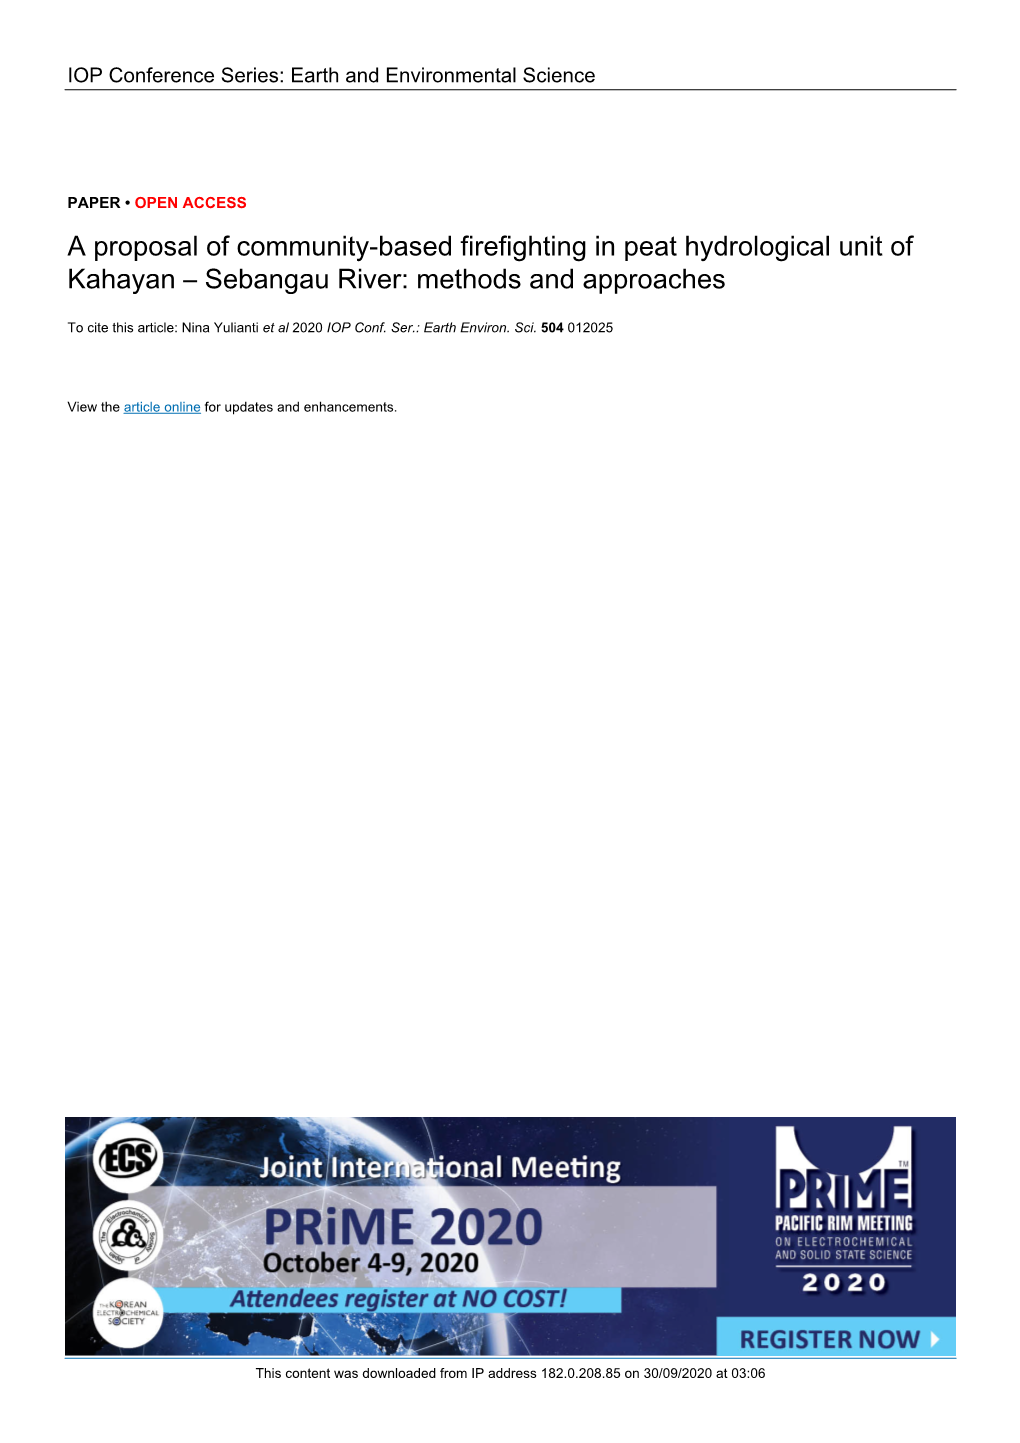 A Proposal of Community-Based Firefighting in Peat Hydrological Unit of Kahayan – Sebangau River: Methods and Approaches